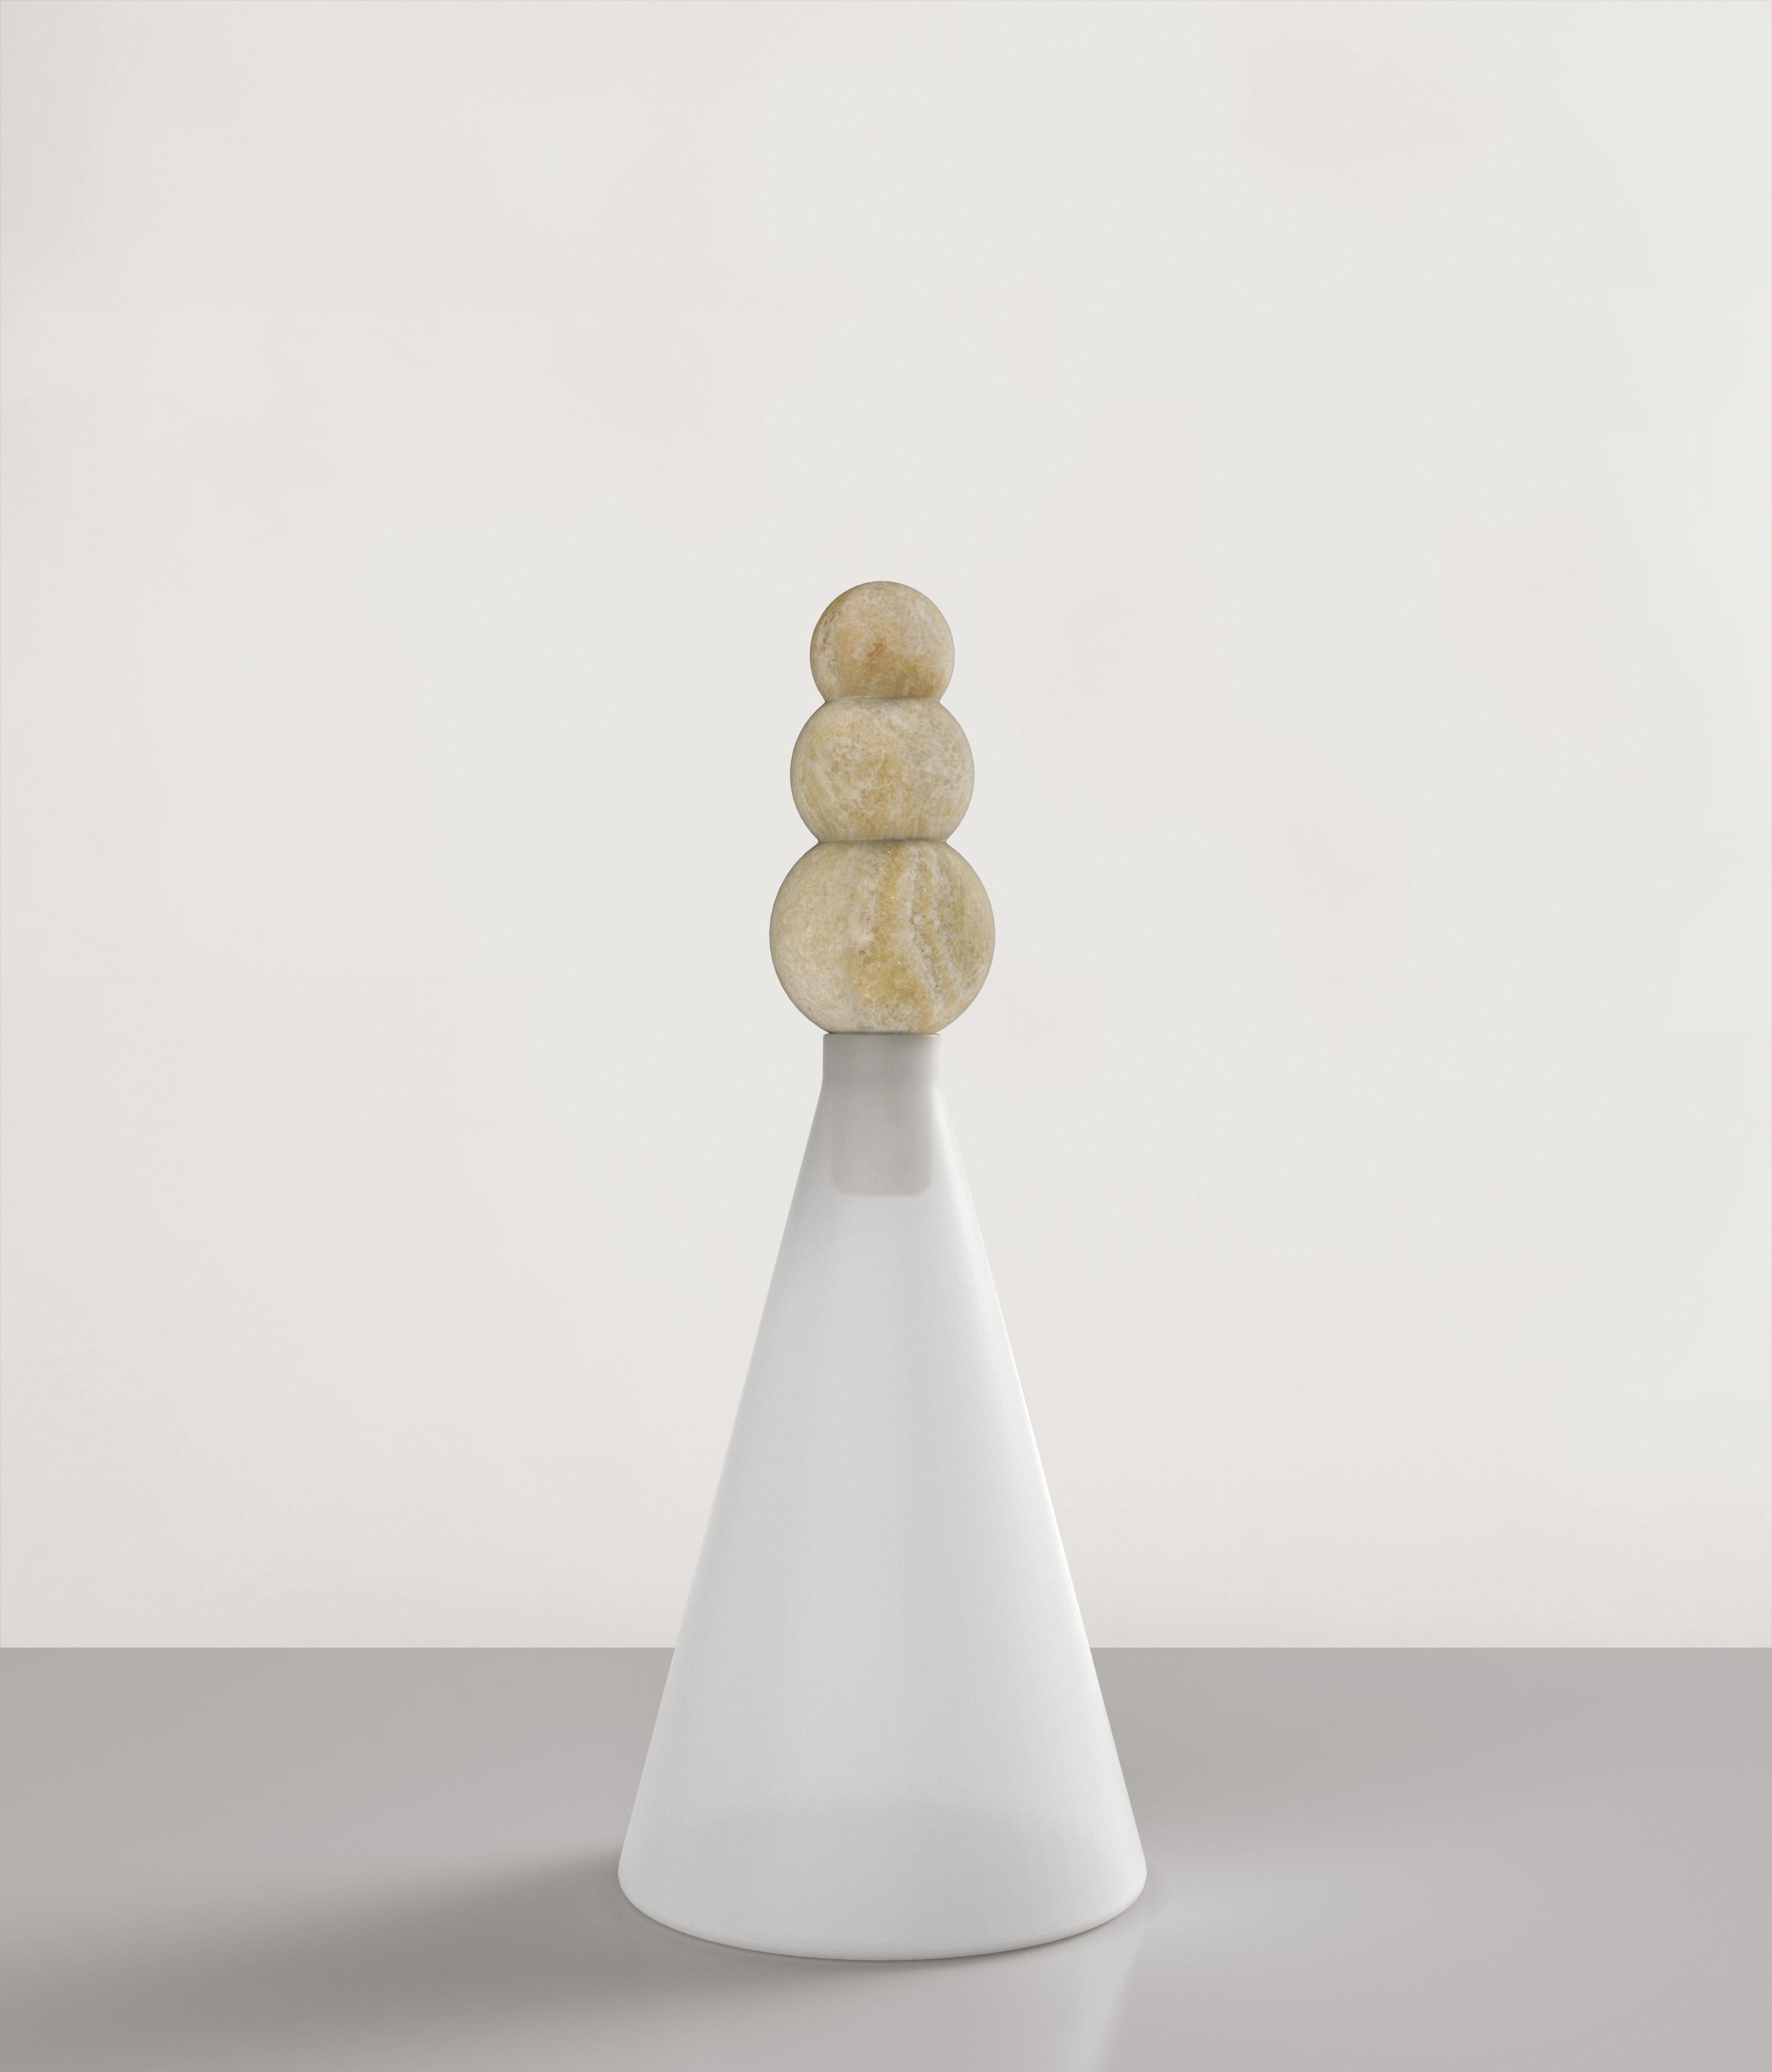 Kite V1 is a 21st Century bottle made by Italian artisans in sanded white glass and miele Onyx. It is part of the collectible design language Kite that has been developed by the Edizione Limitata's art research team in Milan. The top is designed as